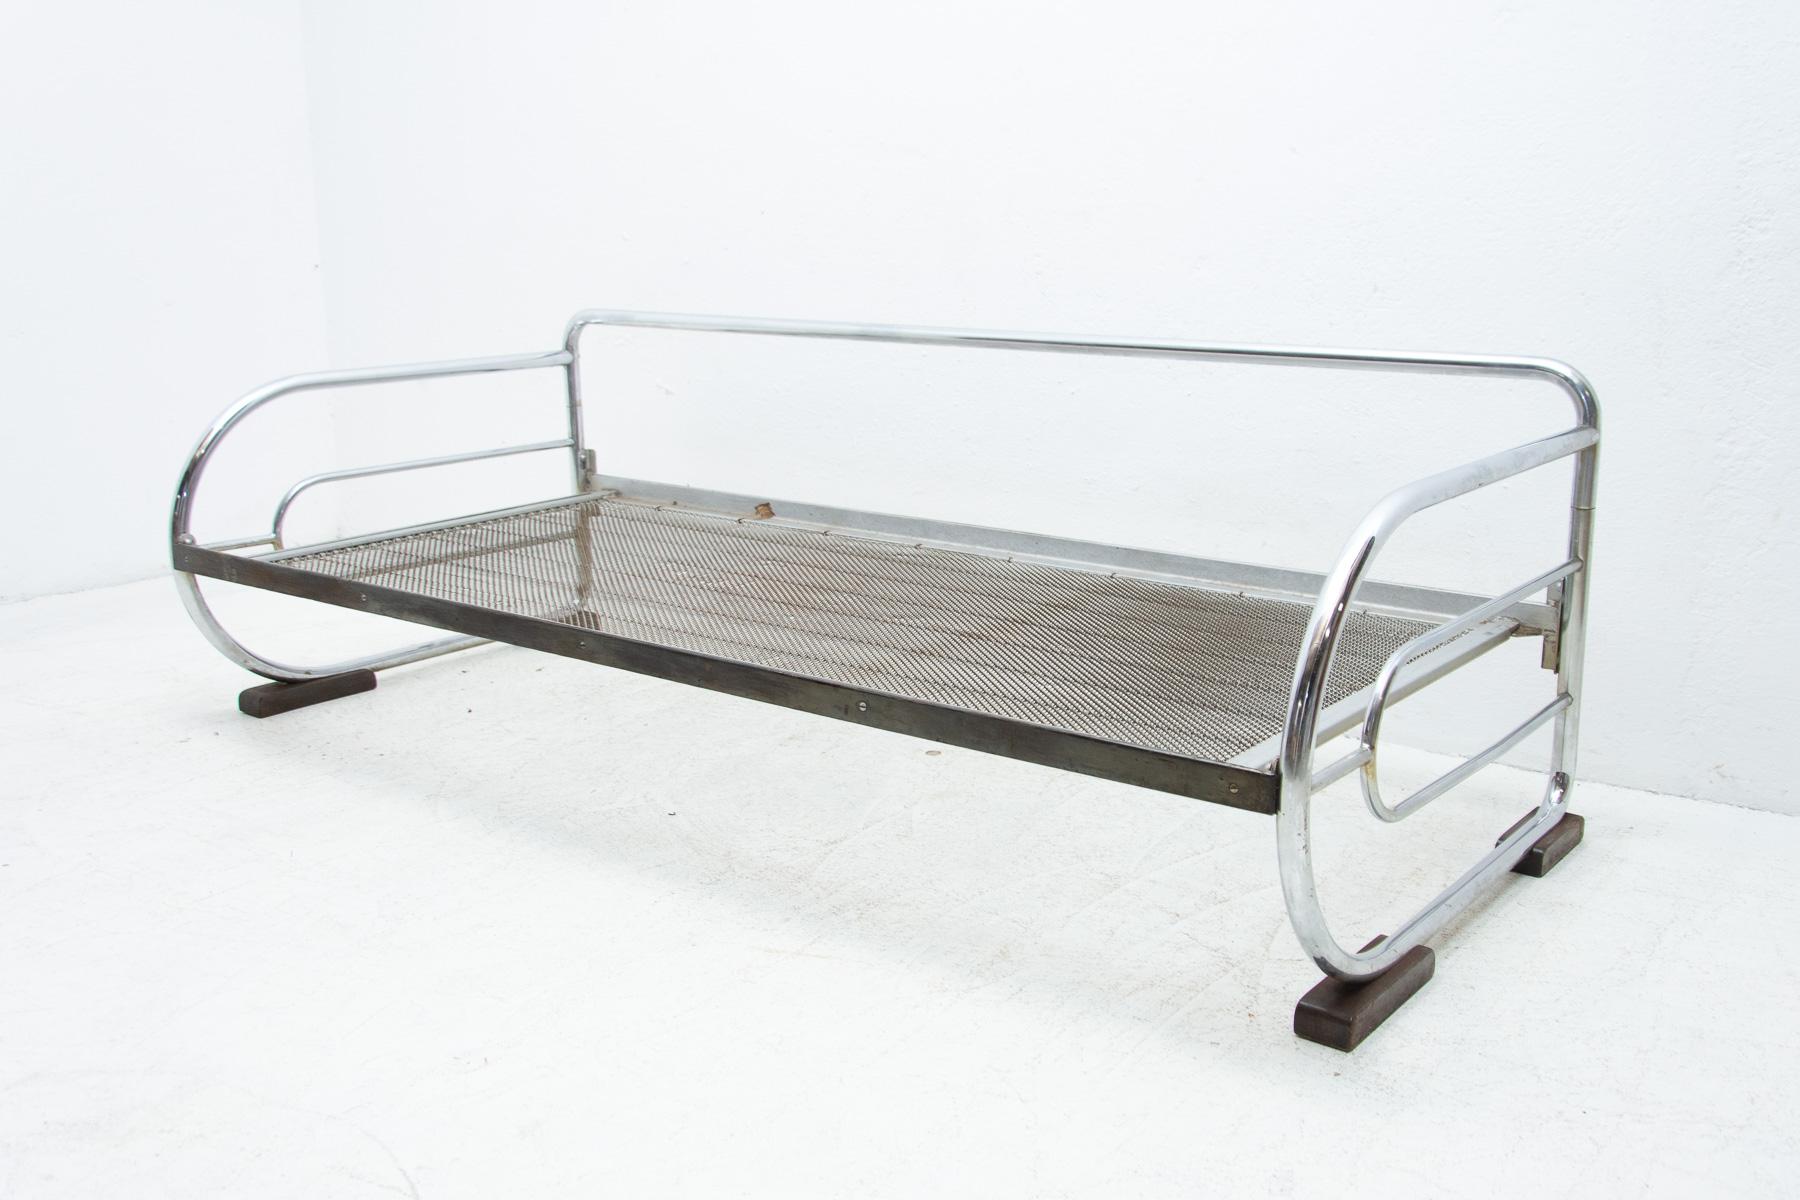 Chromed, tubular steel sofa from the Bauhaus period, 1930s, Bohemia. Made by Hynek Gottwald company. Chrome is in good vintage condition, the mattresses show signs of age and using.
It has four wooden legs.

Measures: Height 62 cm

Length 190